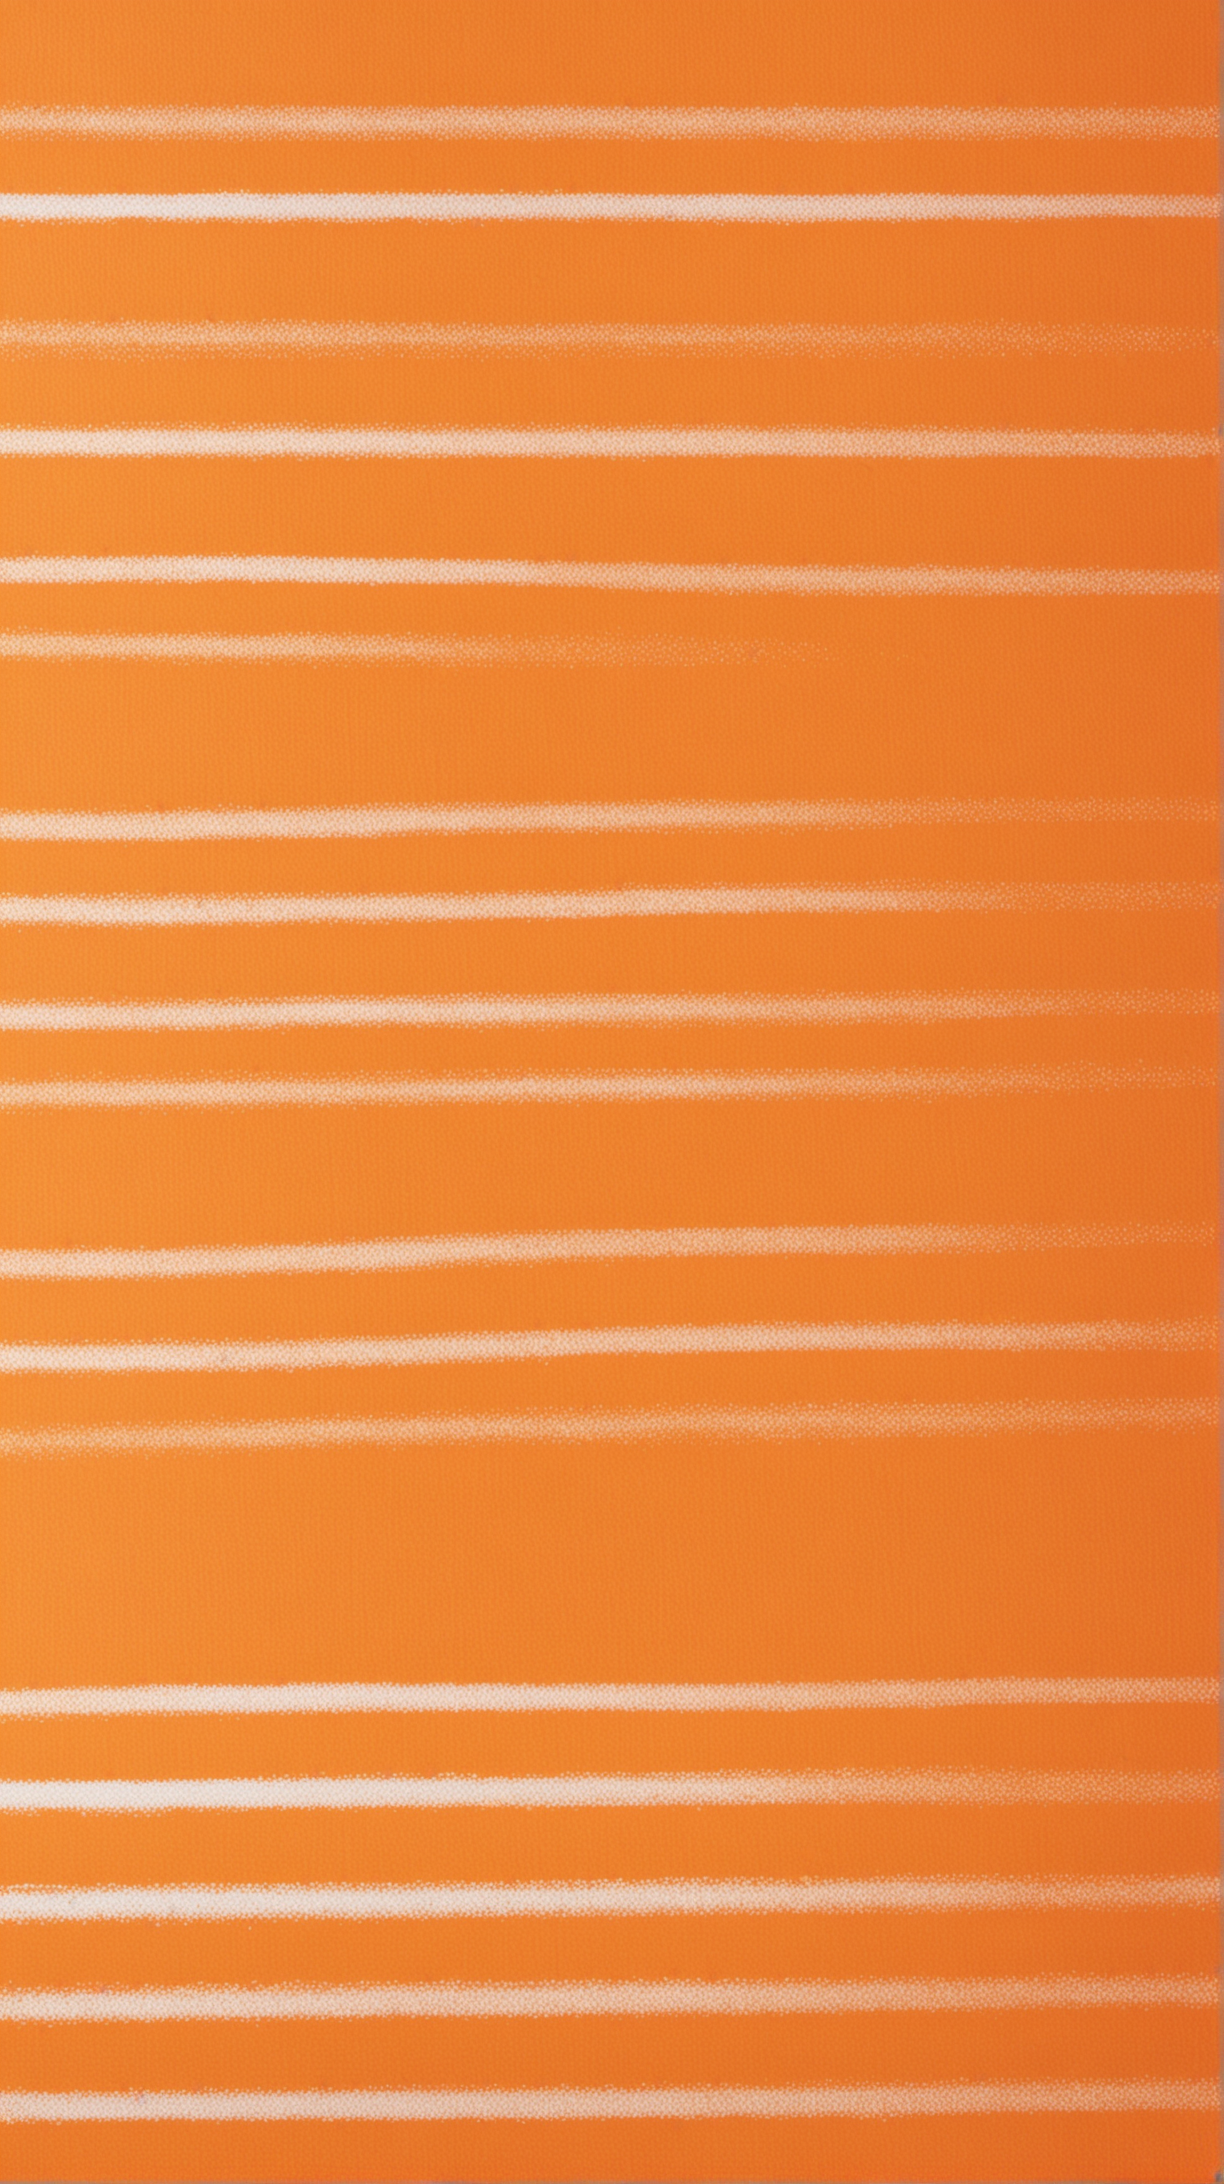 a bright orange background with white horizontal lines going from left to right from the top to the bottom